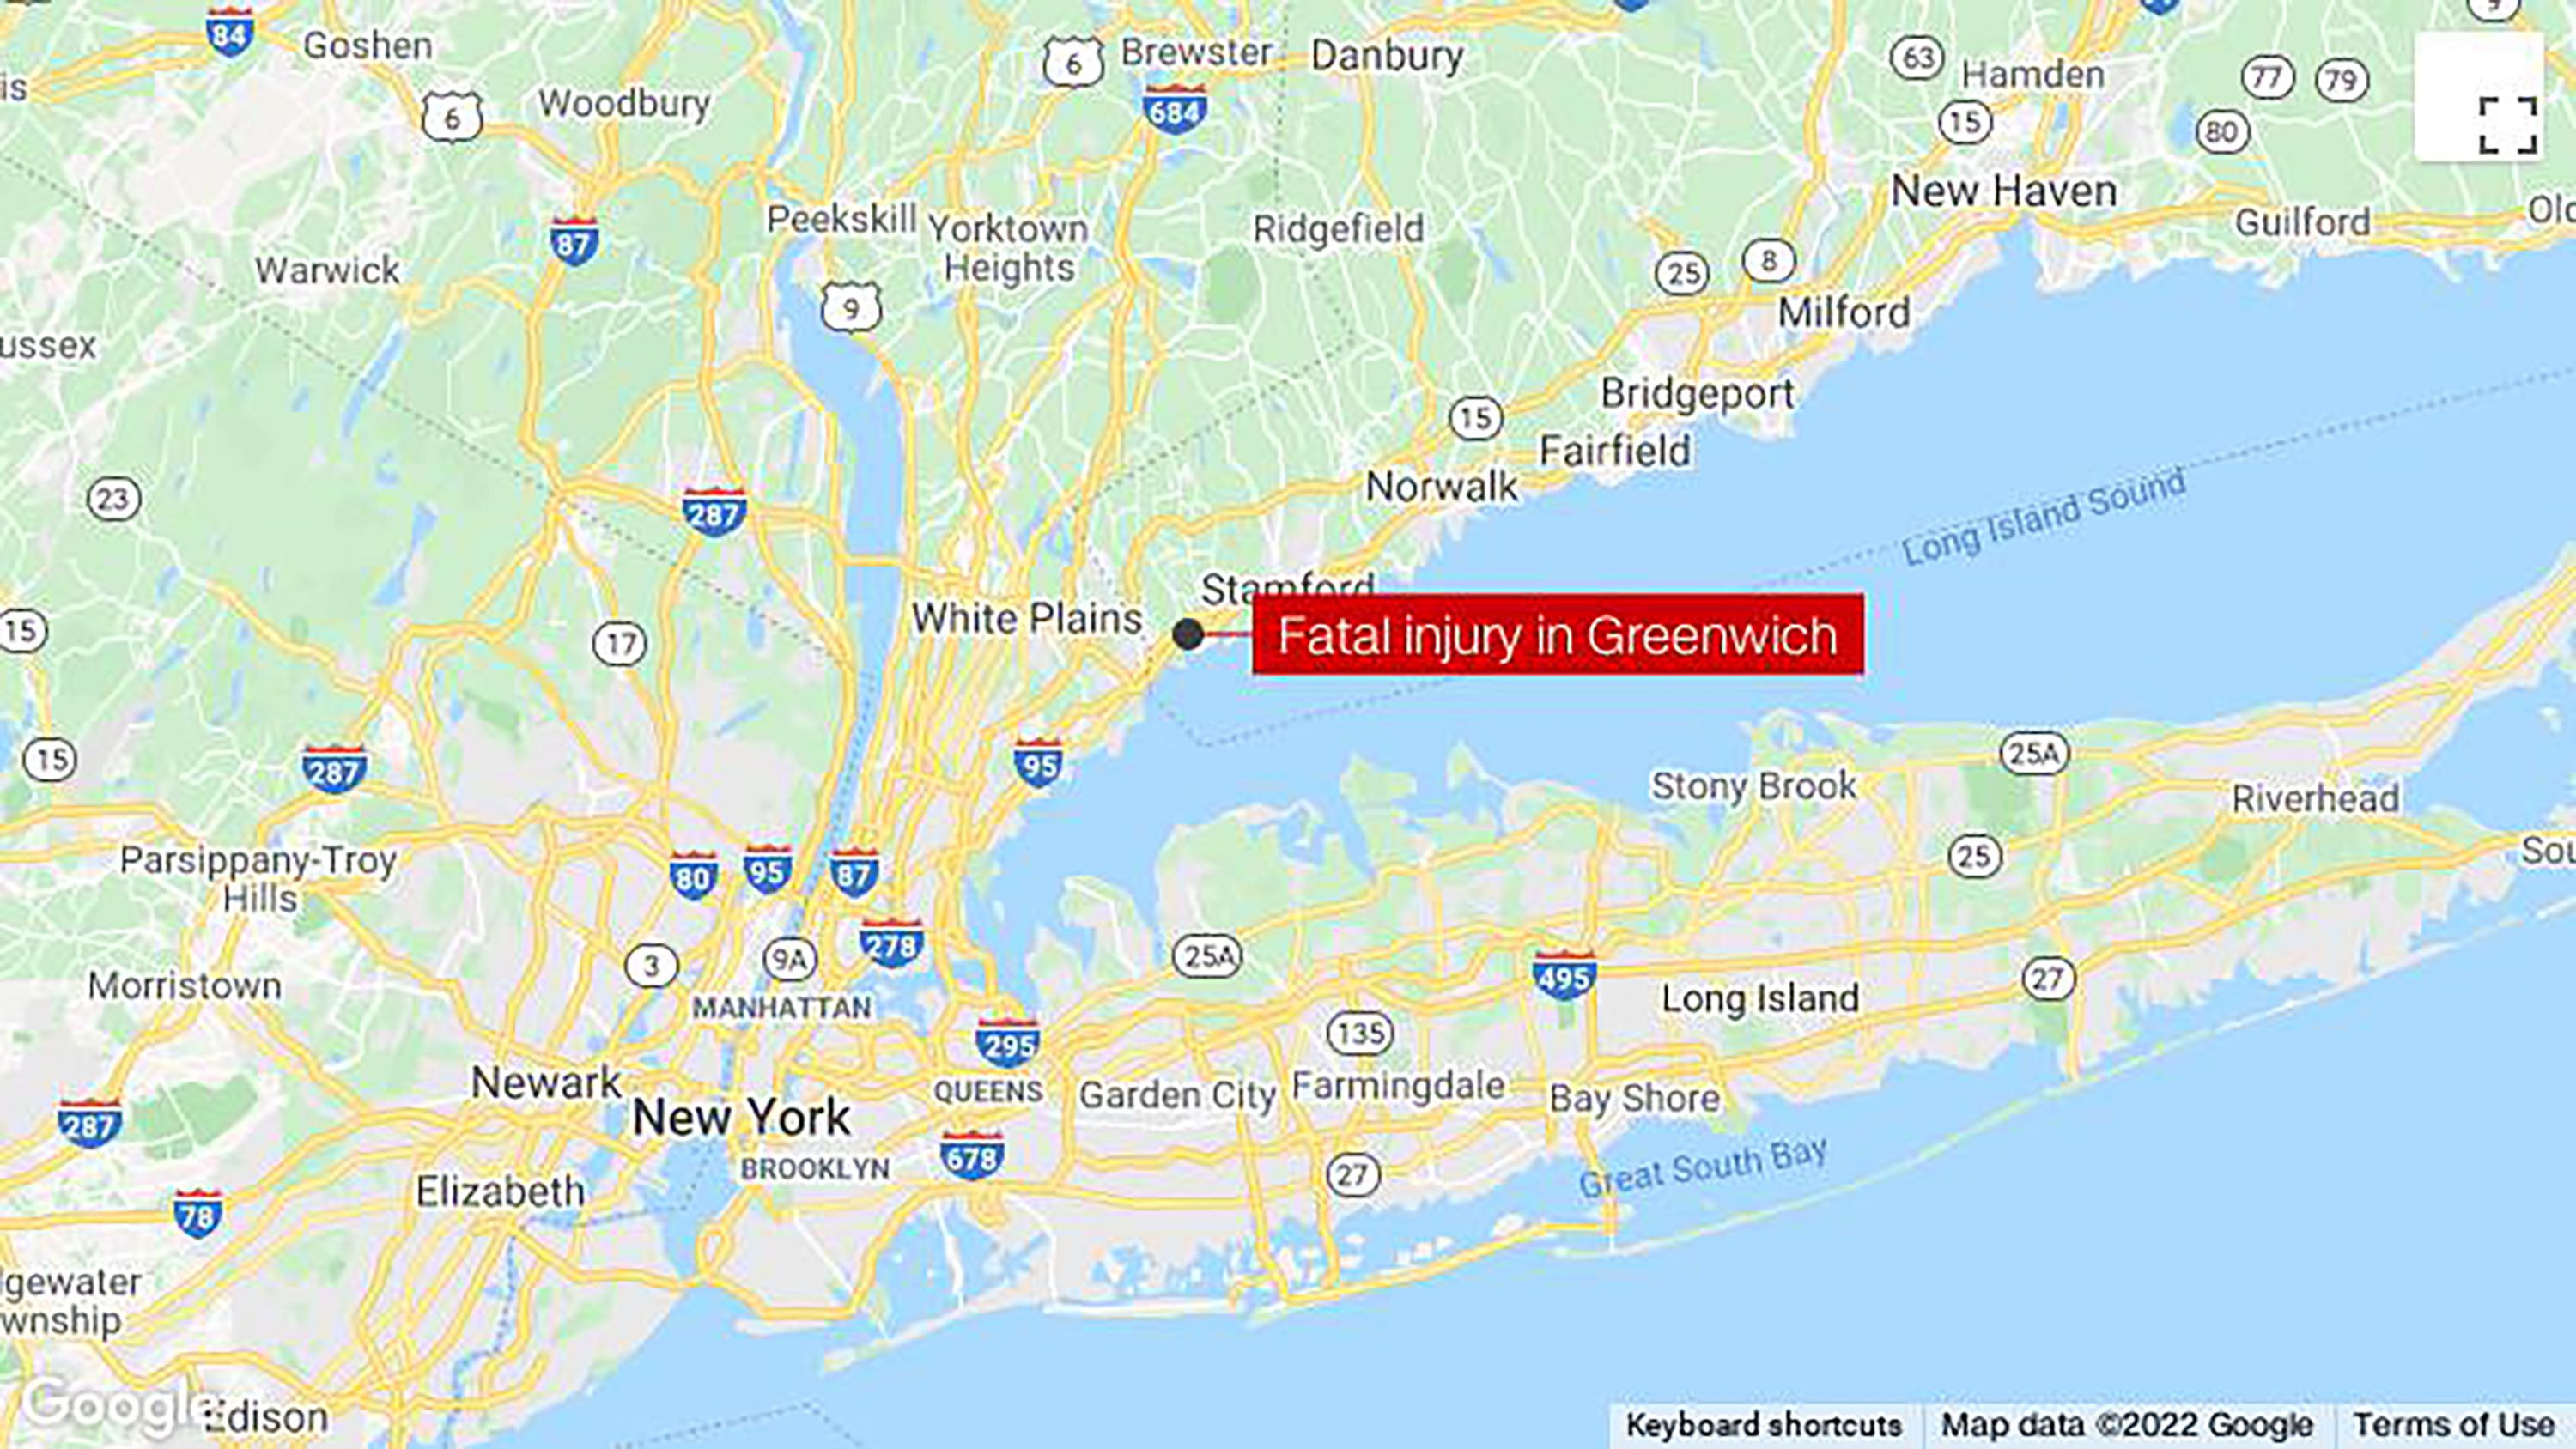 10th grader Teddy Balkind of Connecticut died from an injury